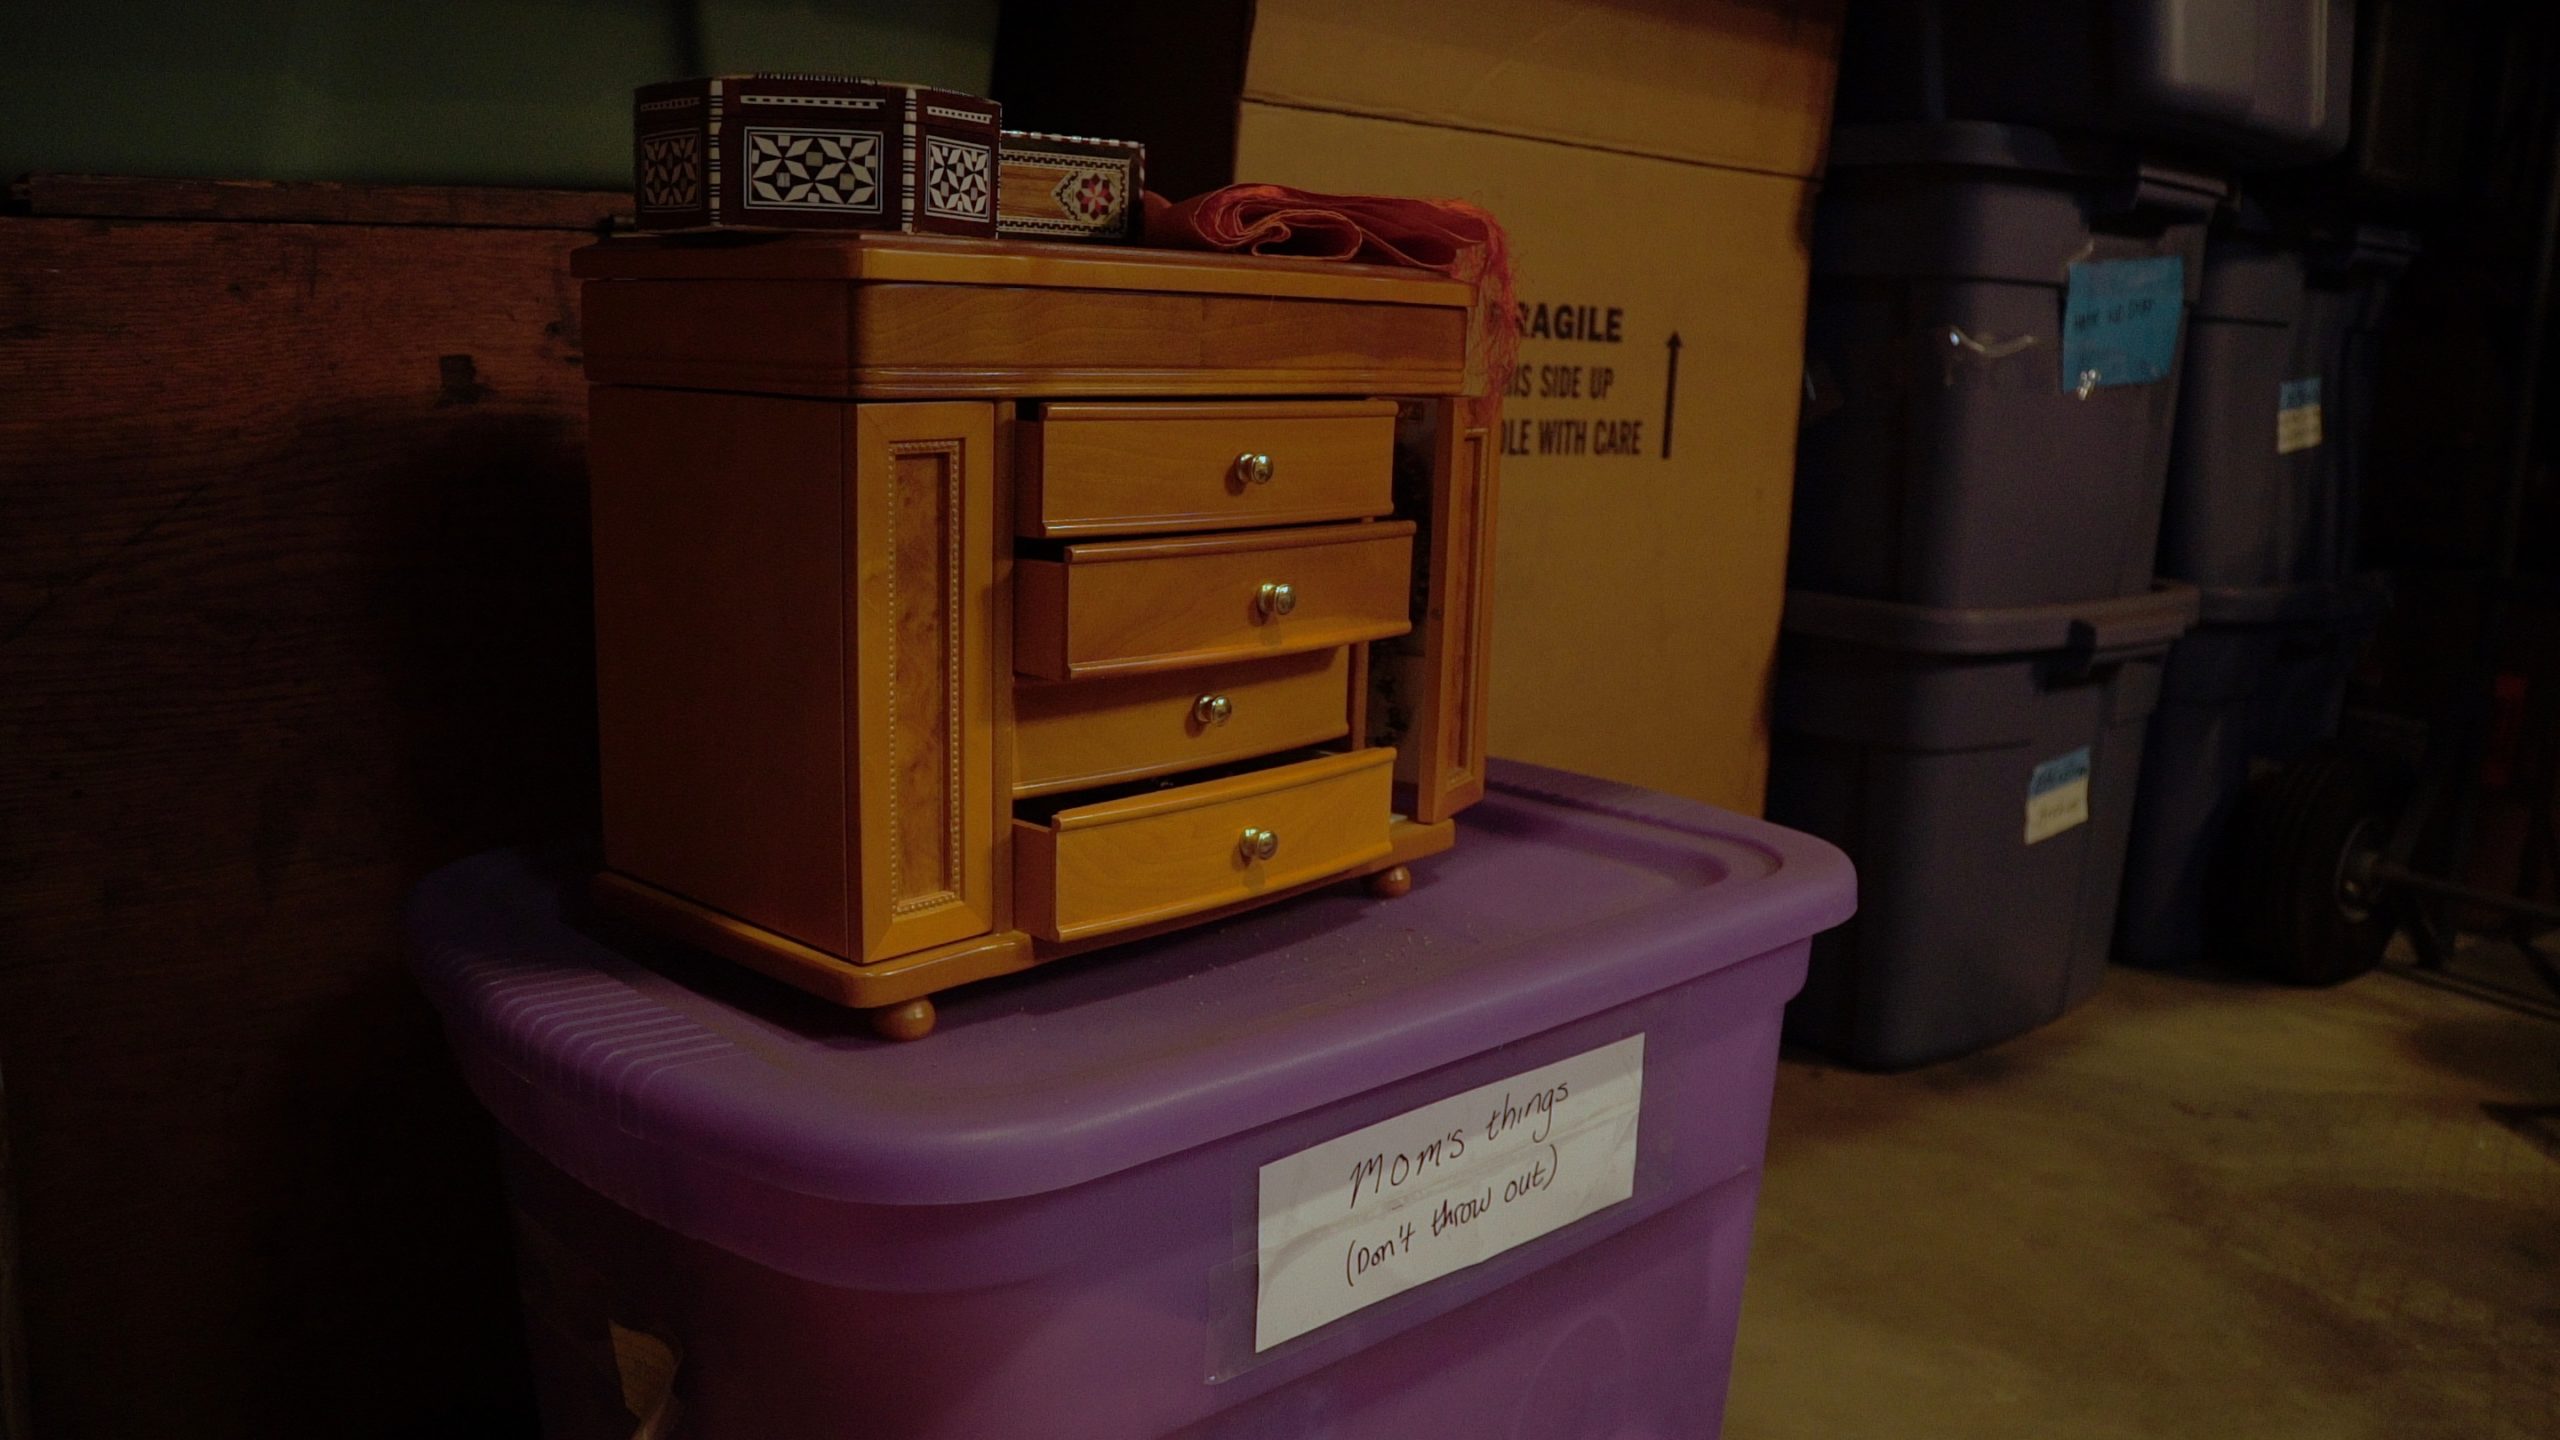 Closeup of small table with drawers sitting on a purple tote in a storage room with other totes and boxes